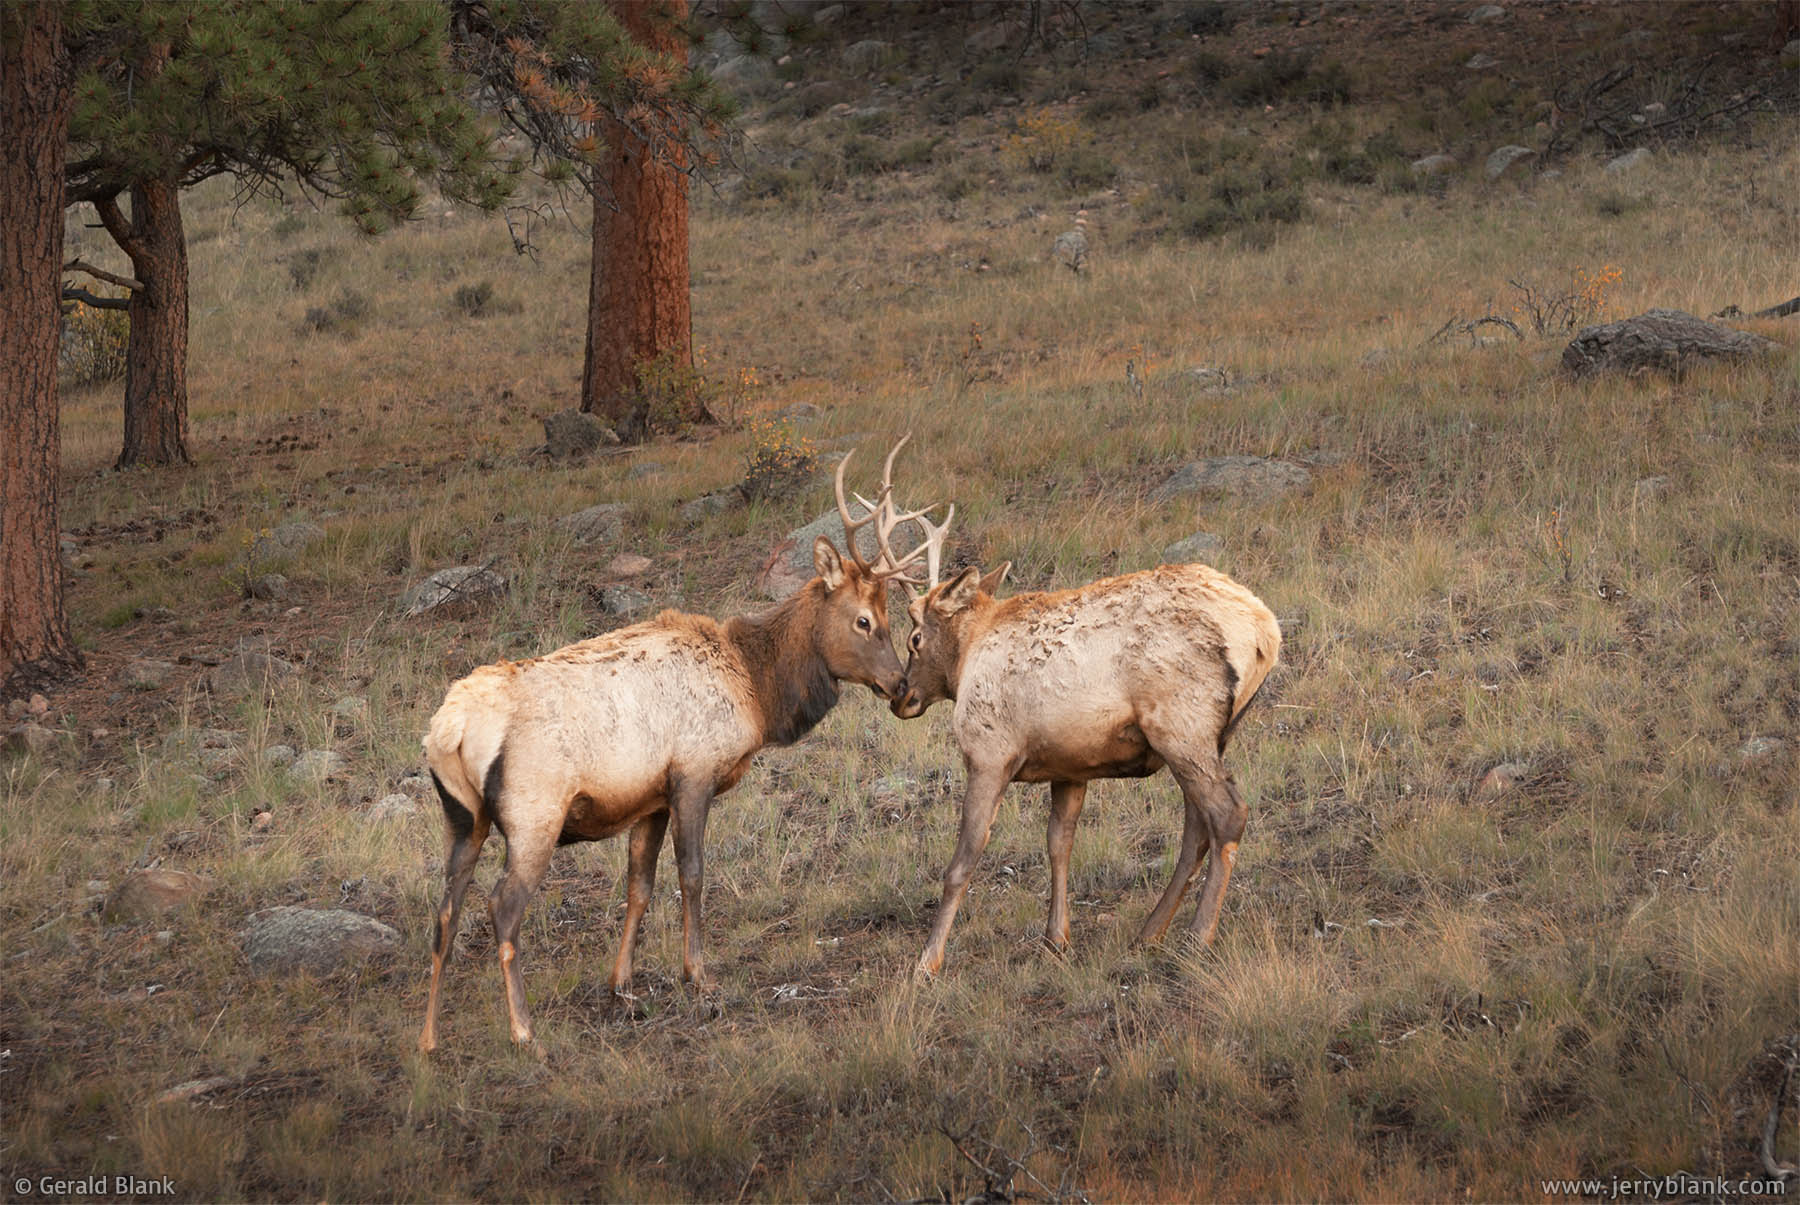 #06422 - A pair of juvenile elk engage in playful sparring, in the Moraine Park area of Rocky Mountain National Park, Estes Park, Colorado - photo by Jerry Blank